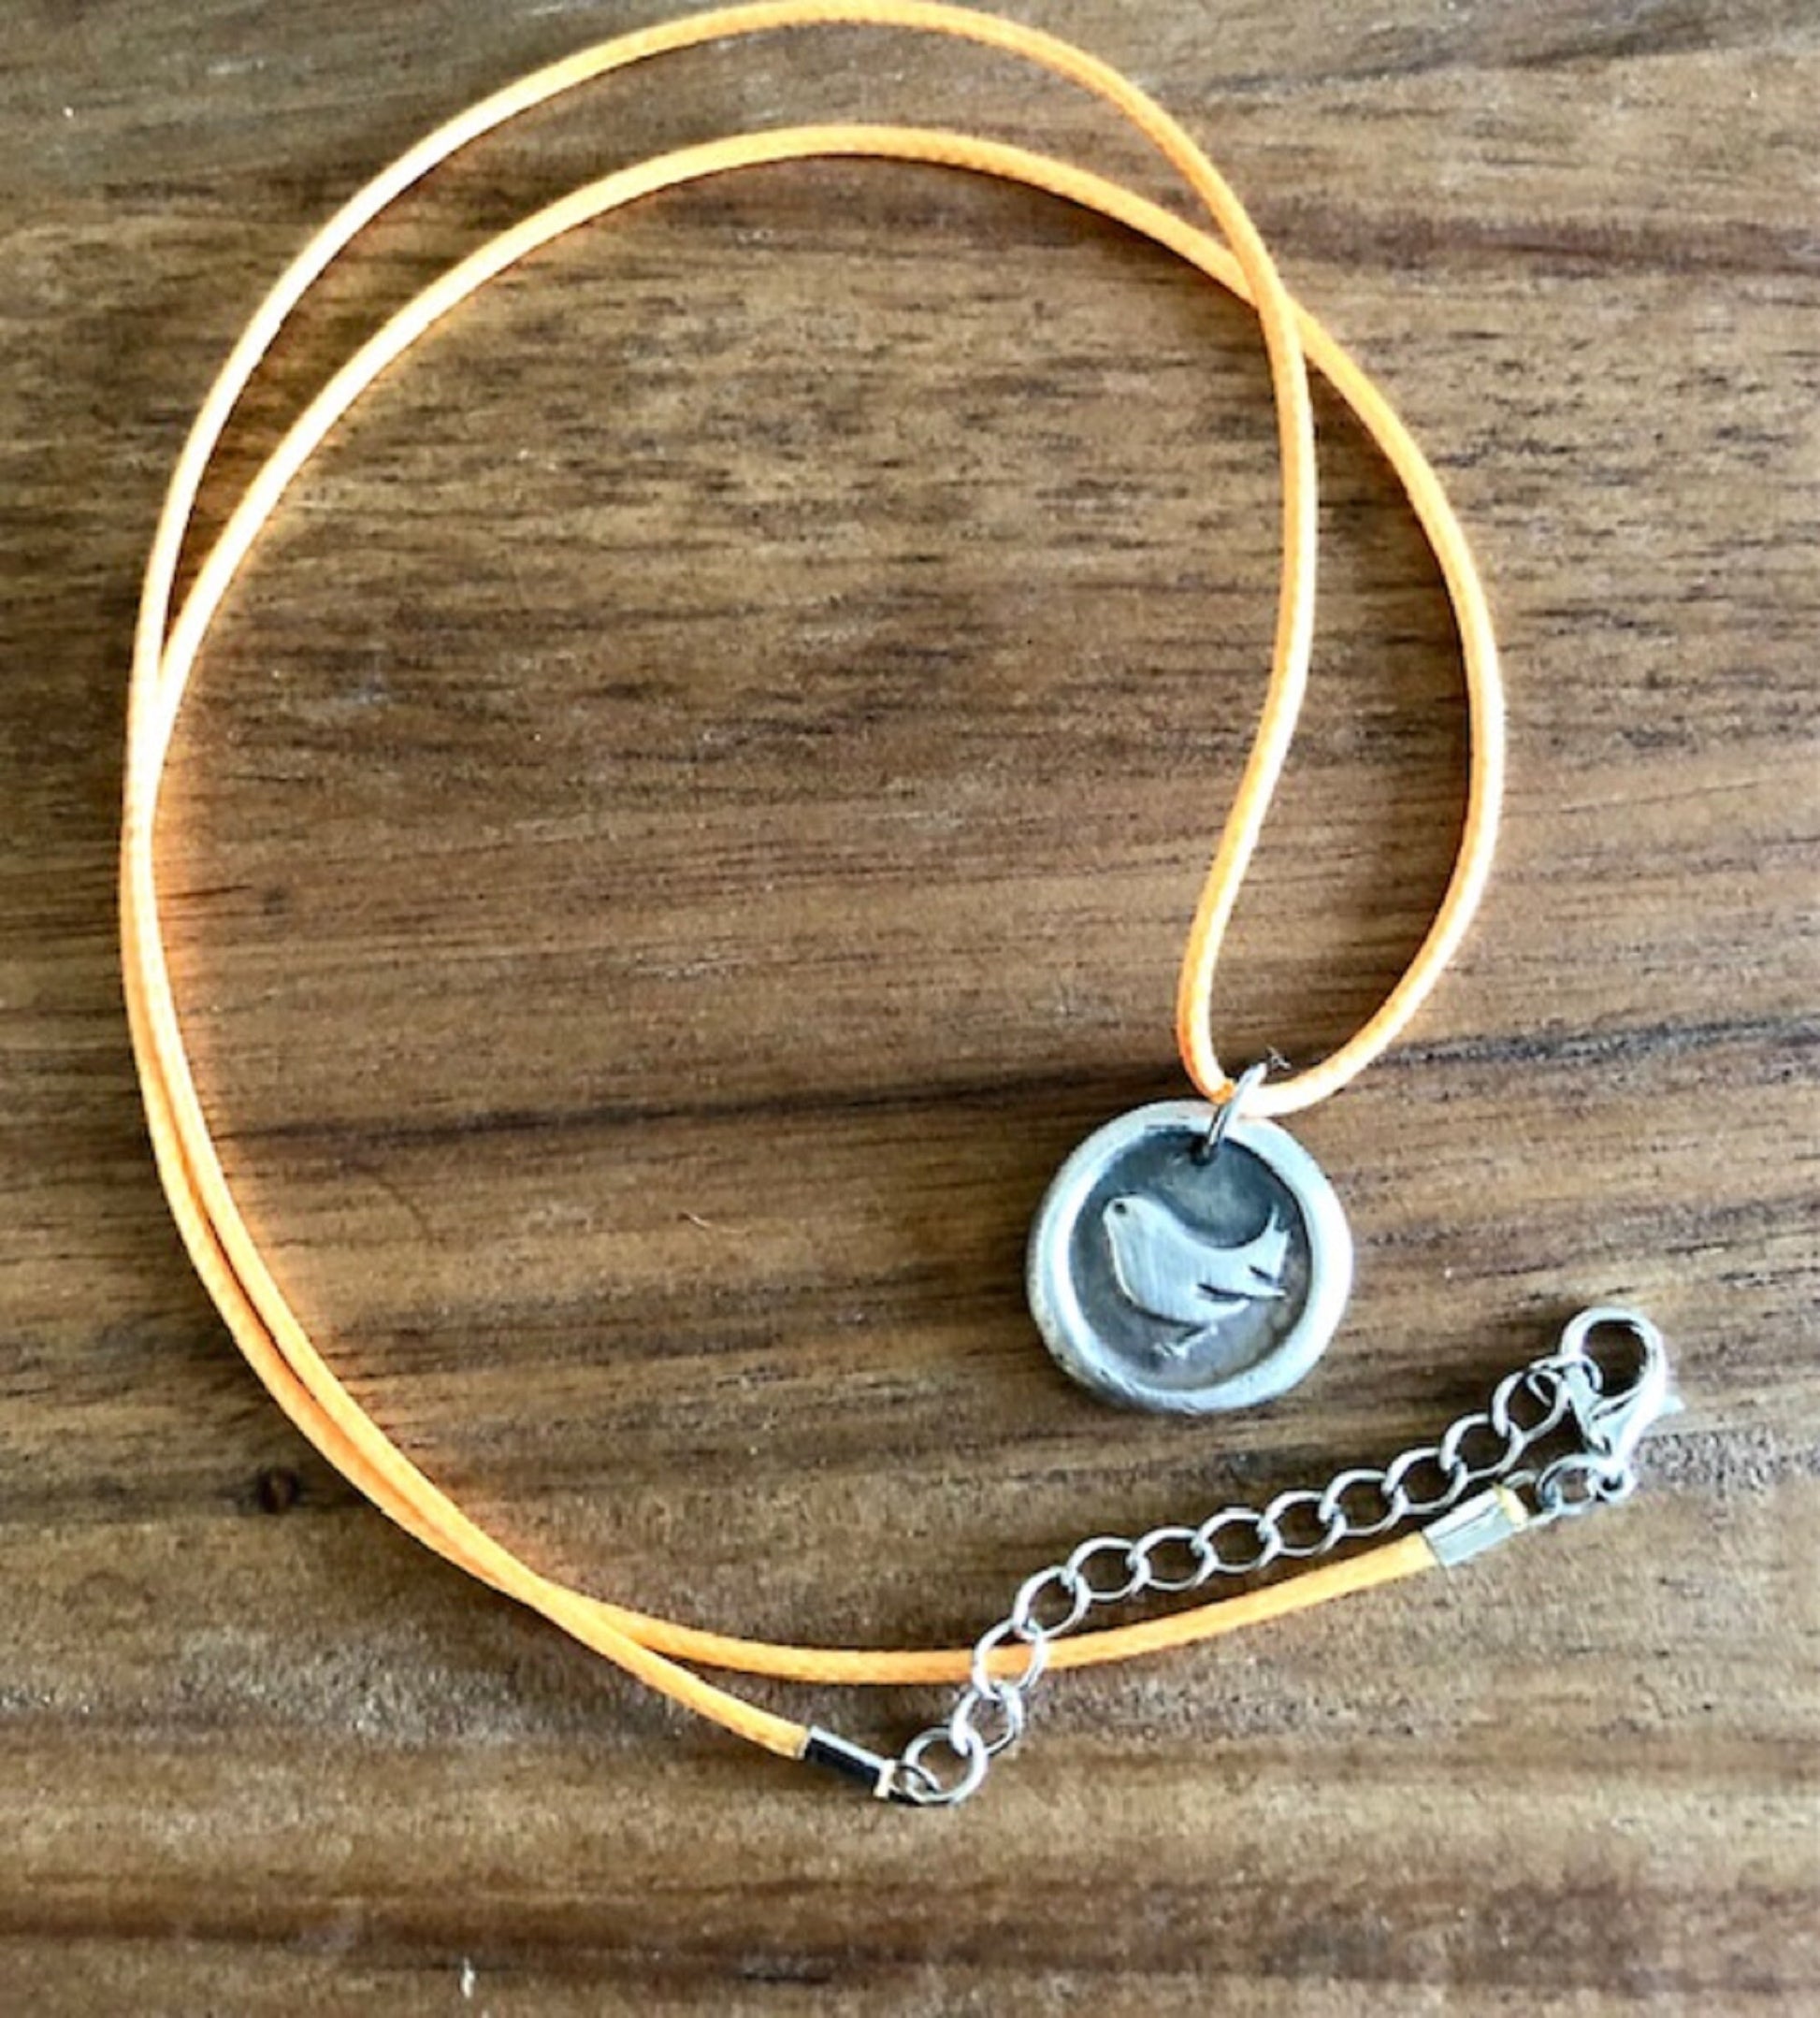 Silver Wren Pendant Necklace - A symbol of Strength, Will Power, Determination, Never Give Up, Success - Made From An Antique Wax Seal, 116